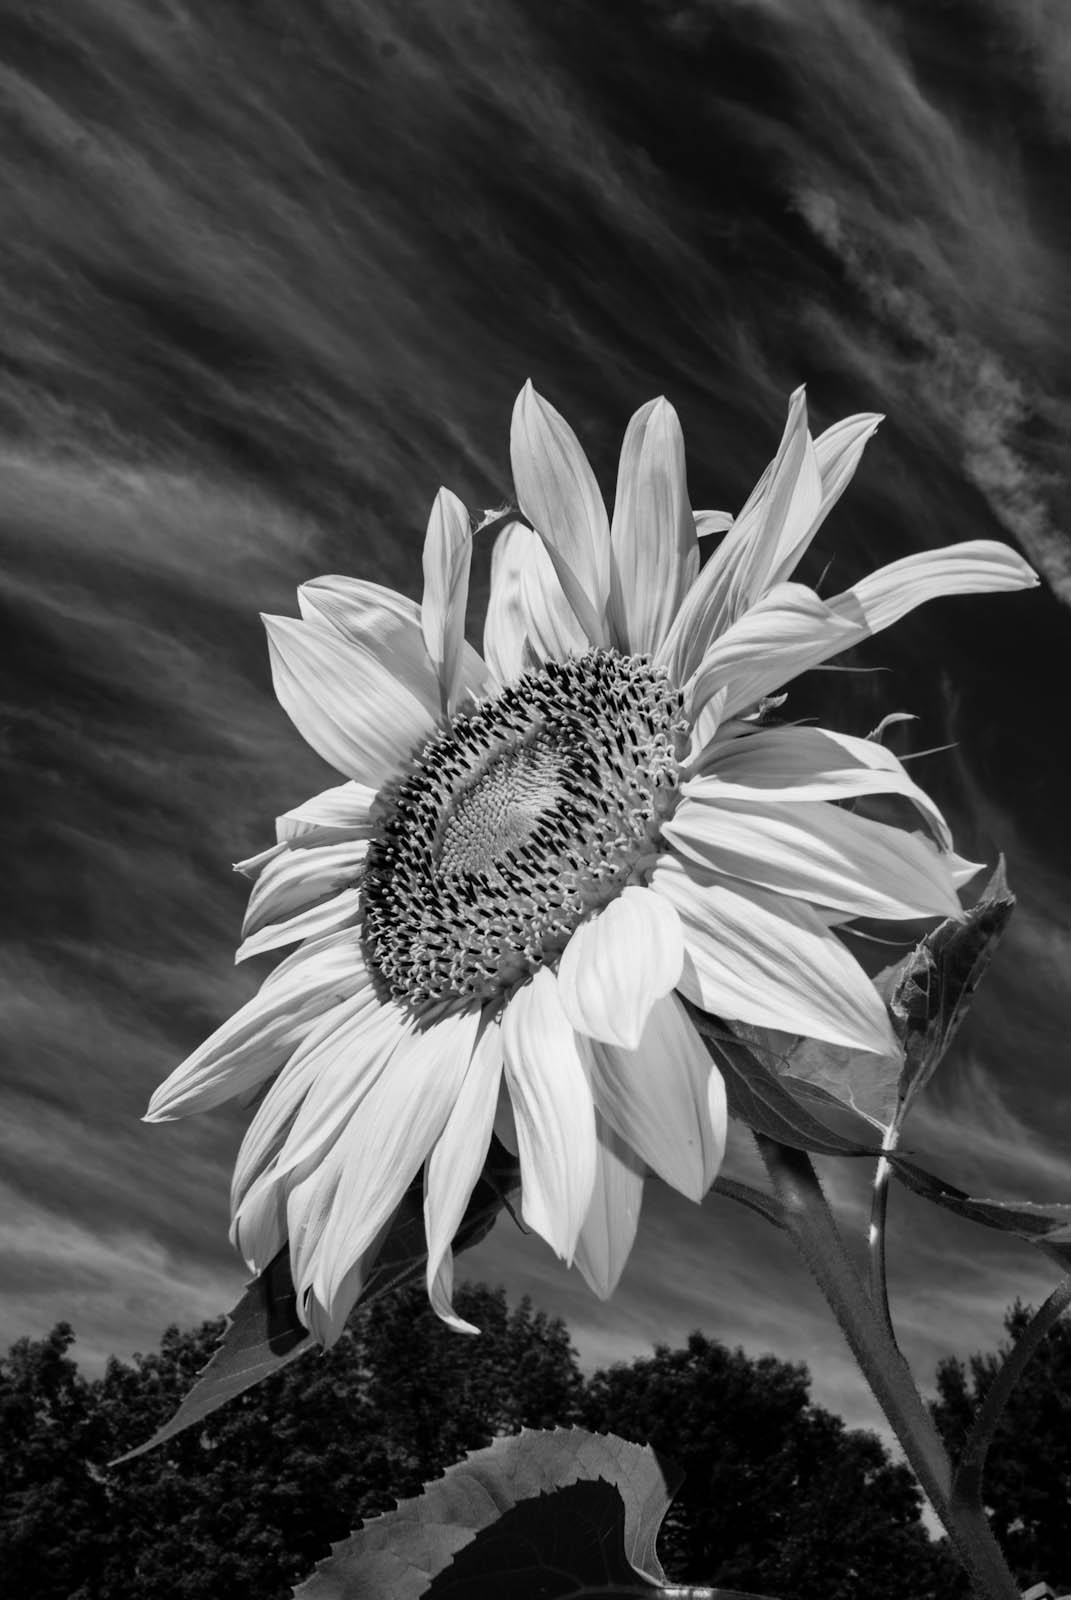 Black And White - Sunflower Photography Black And White - HD Wallpaper 